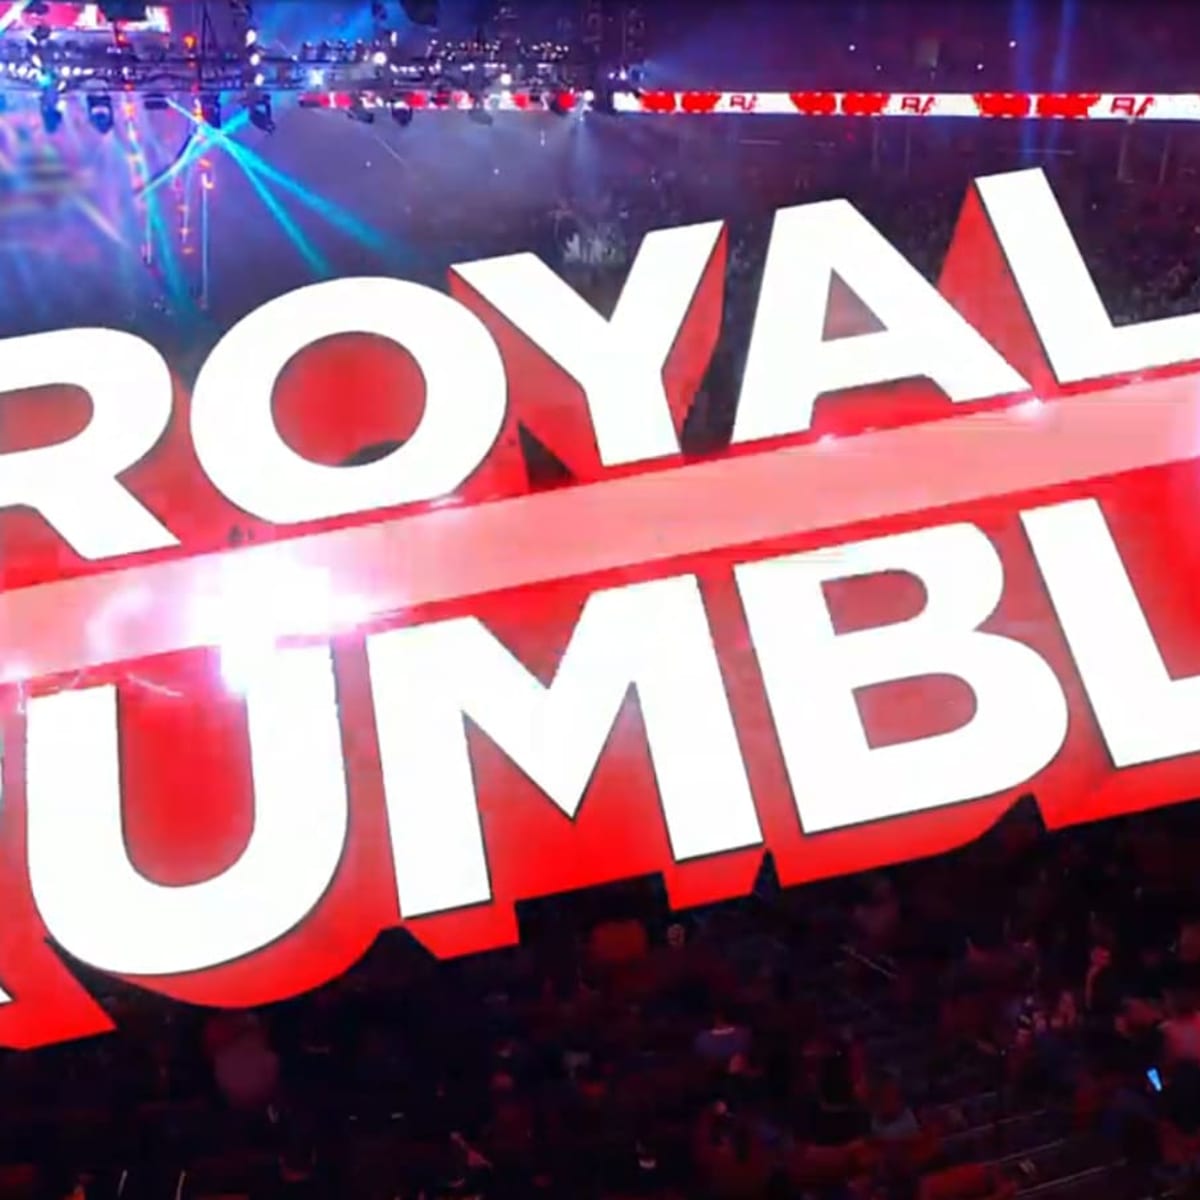 WWE Royal Rumble date and location announced